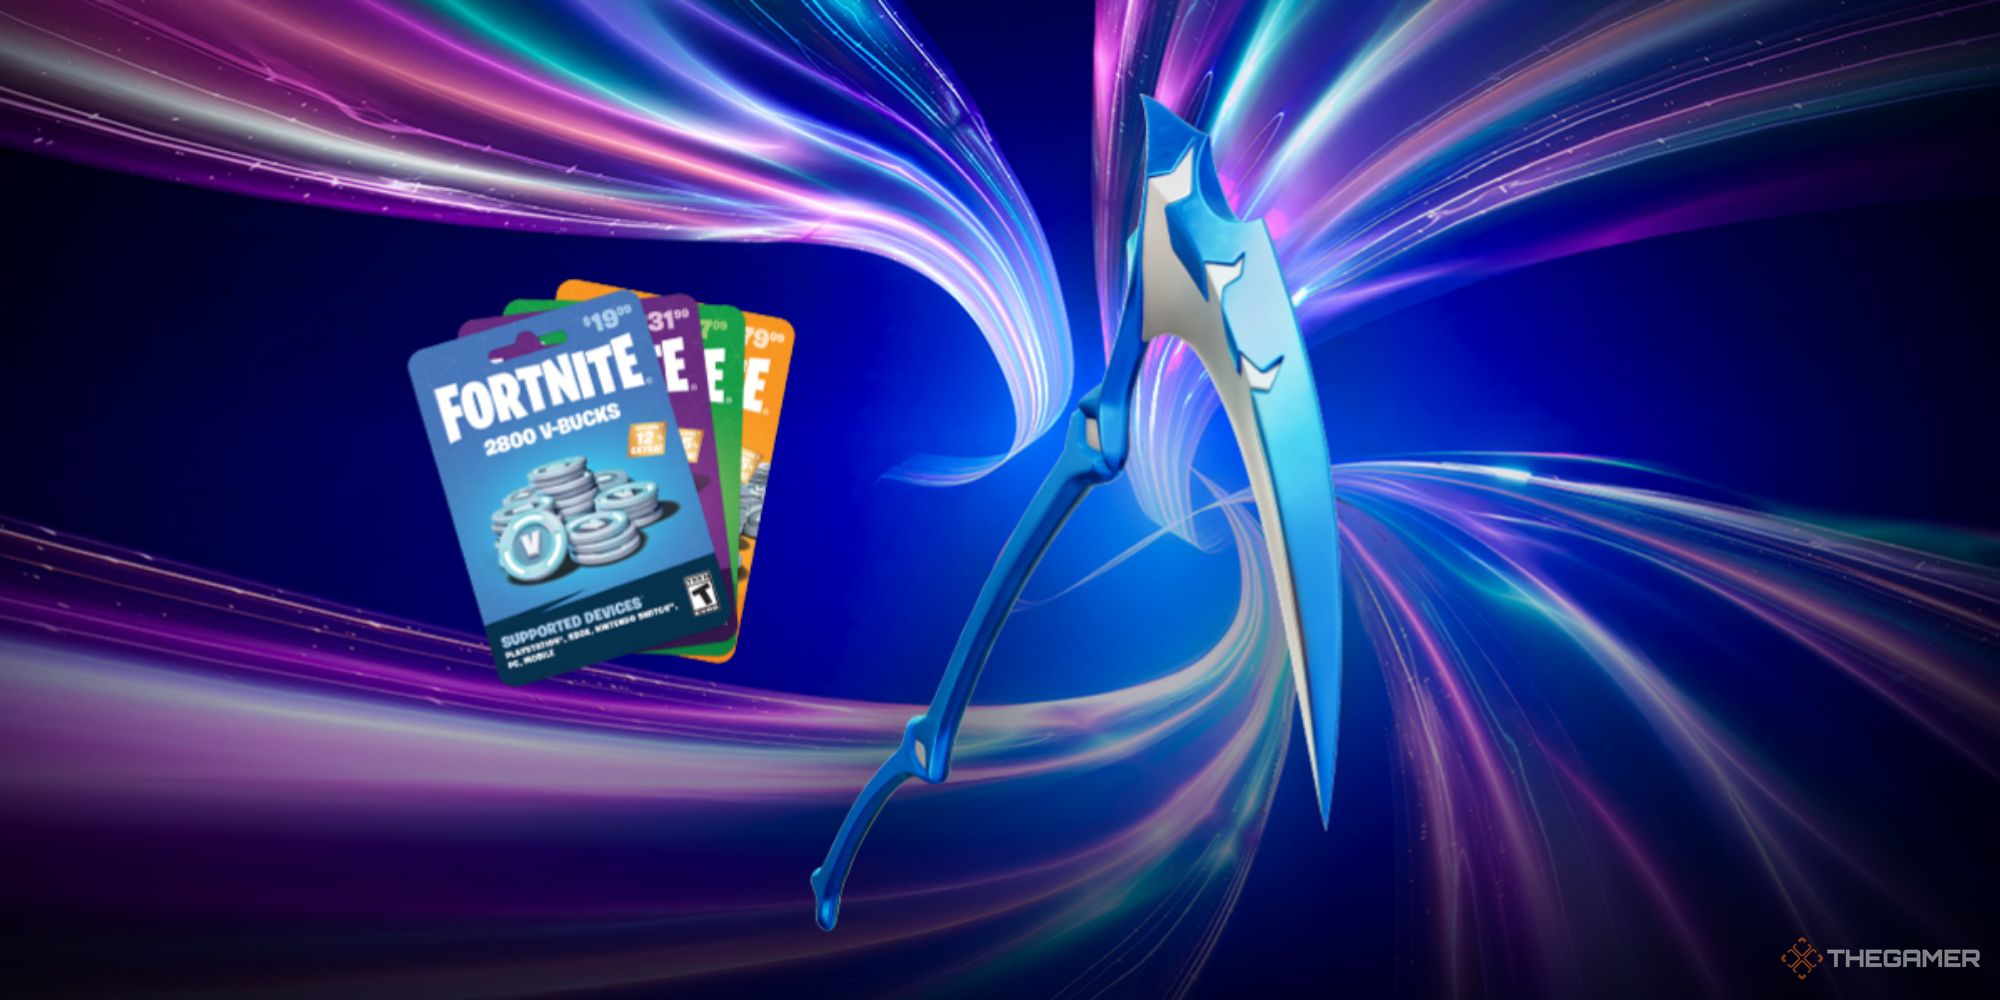 A screenshot from Fortnite's webpage showing V-bucks cards and a blue metal scythe.